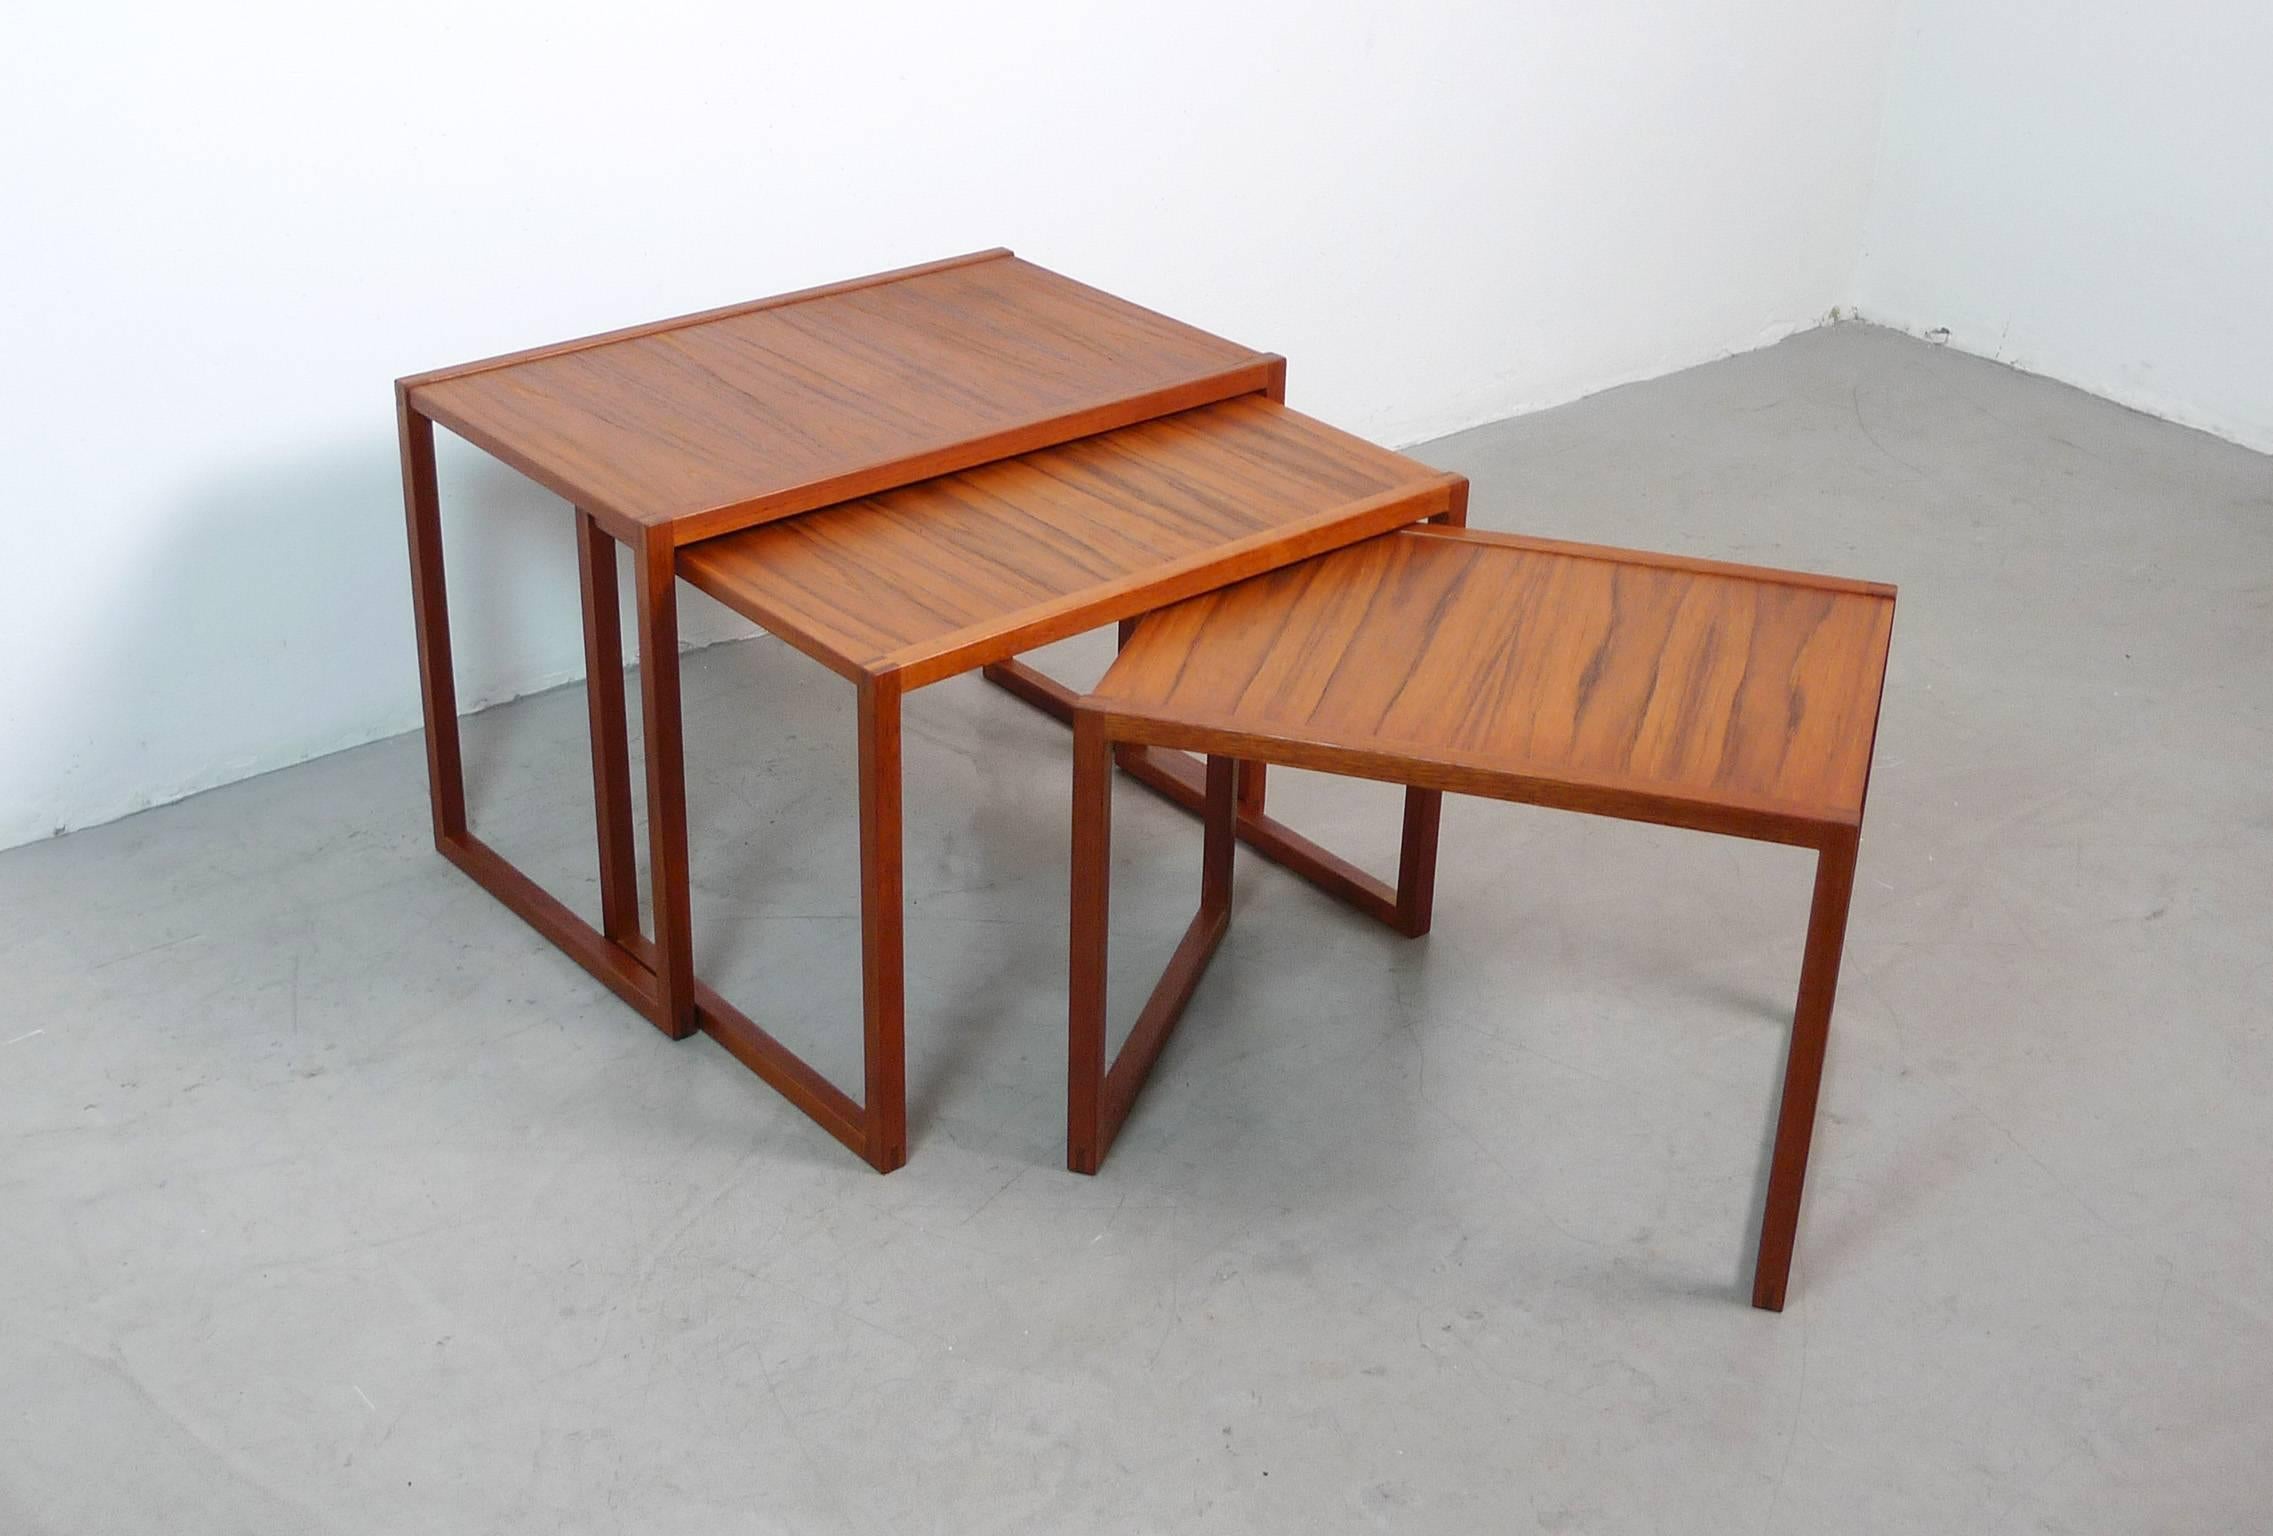 Danish nesting table set with cubic form made of teakwood from the 1960s.
The biggest table is 60 cm wide and 42 cm high.
The table in the middle is 55 cm wide and 40 cm high.
The smallest table is 50 cm wide and 37 cm high.
All tables are 38 cm